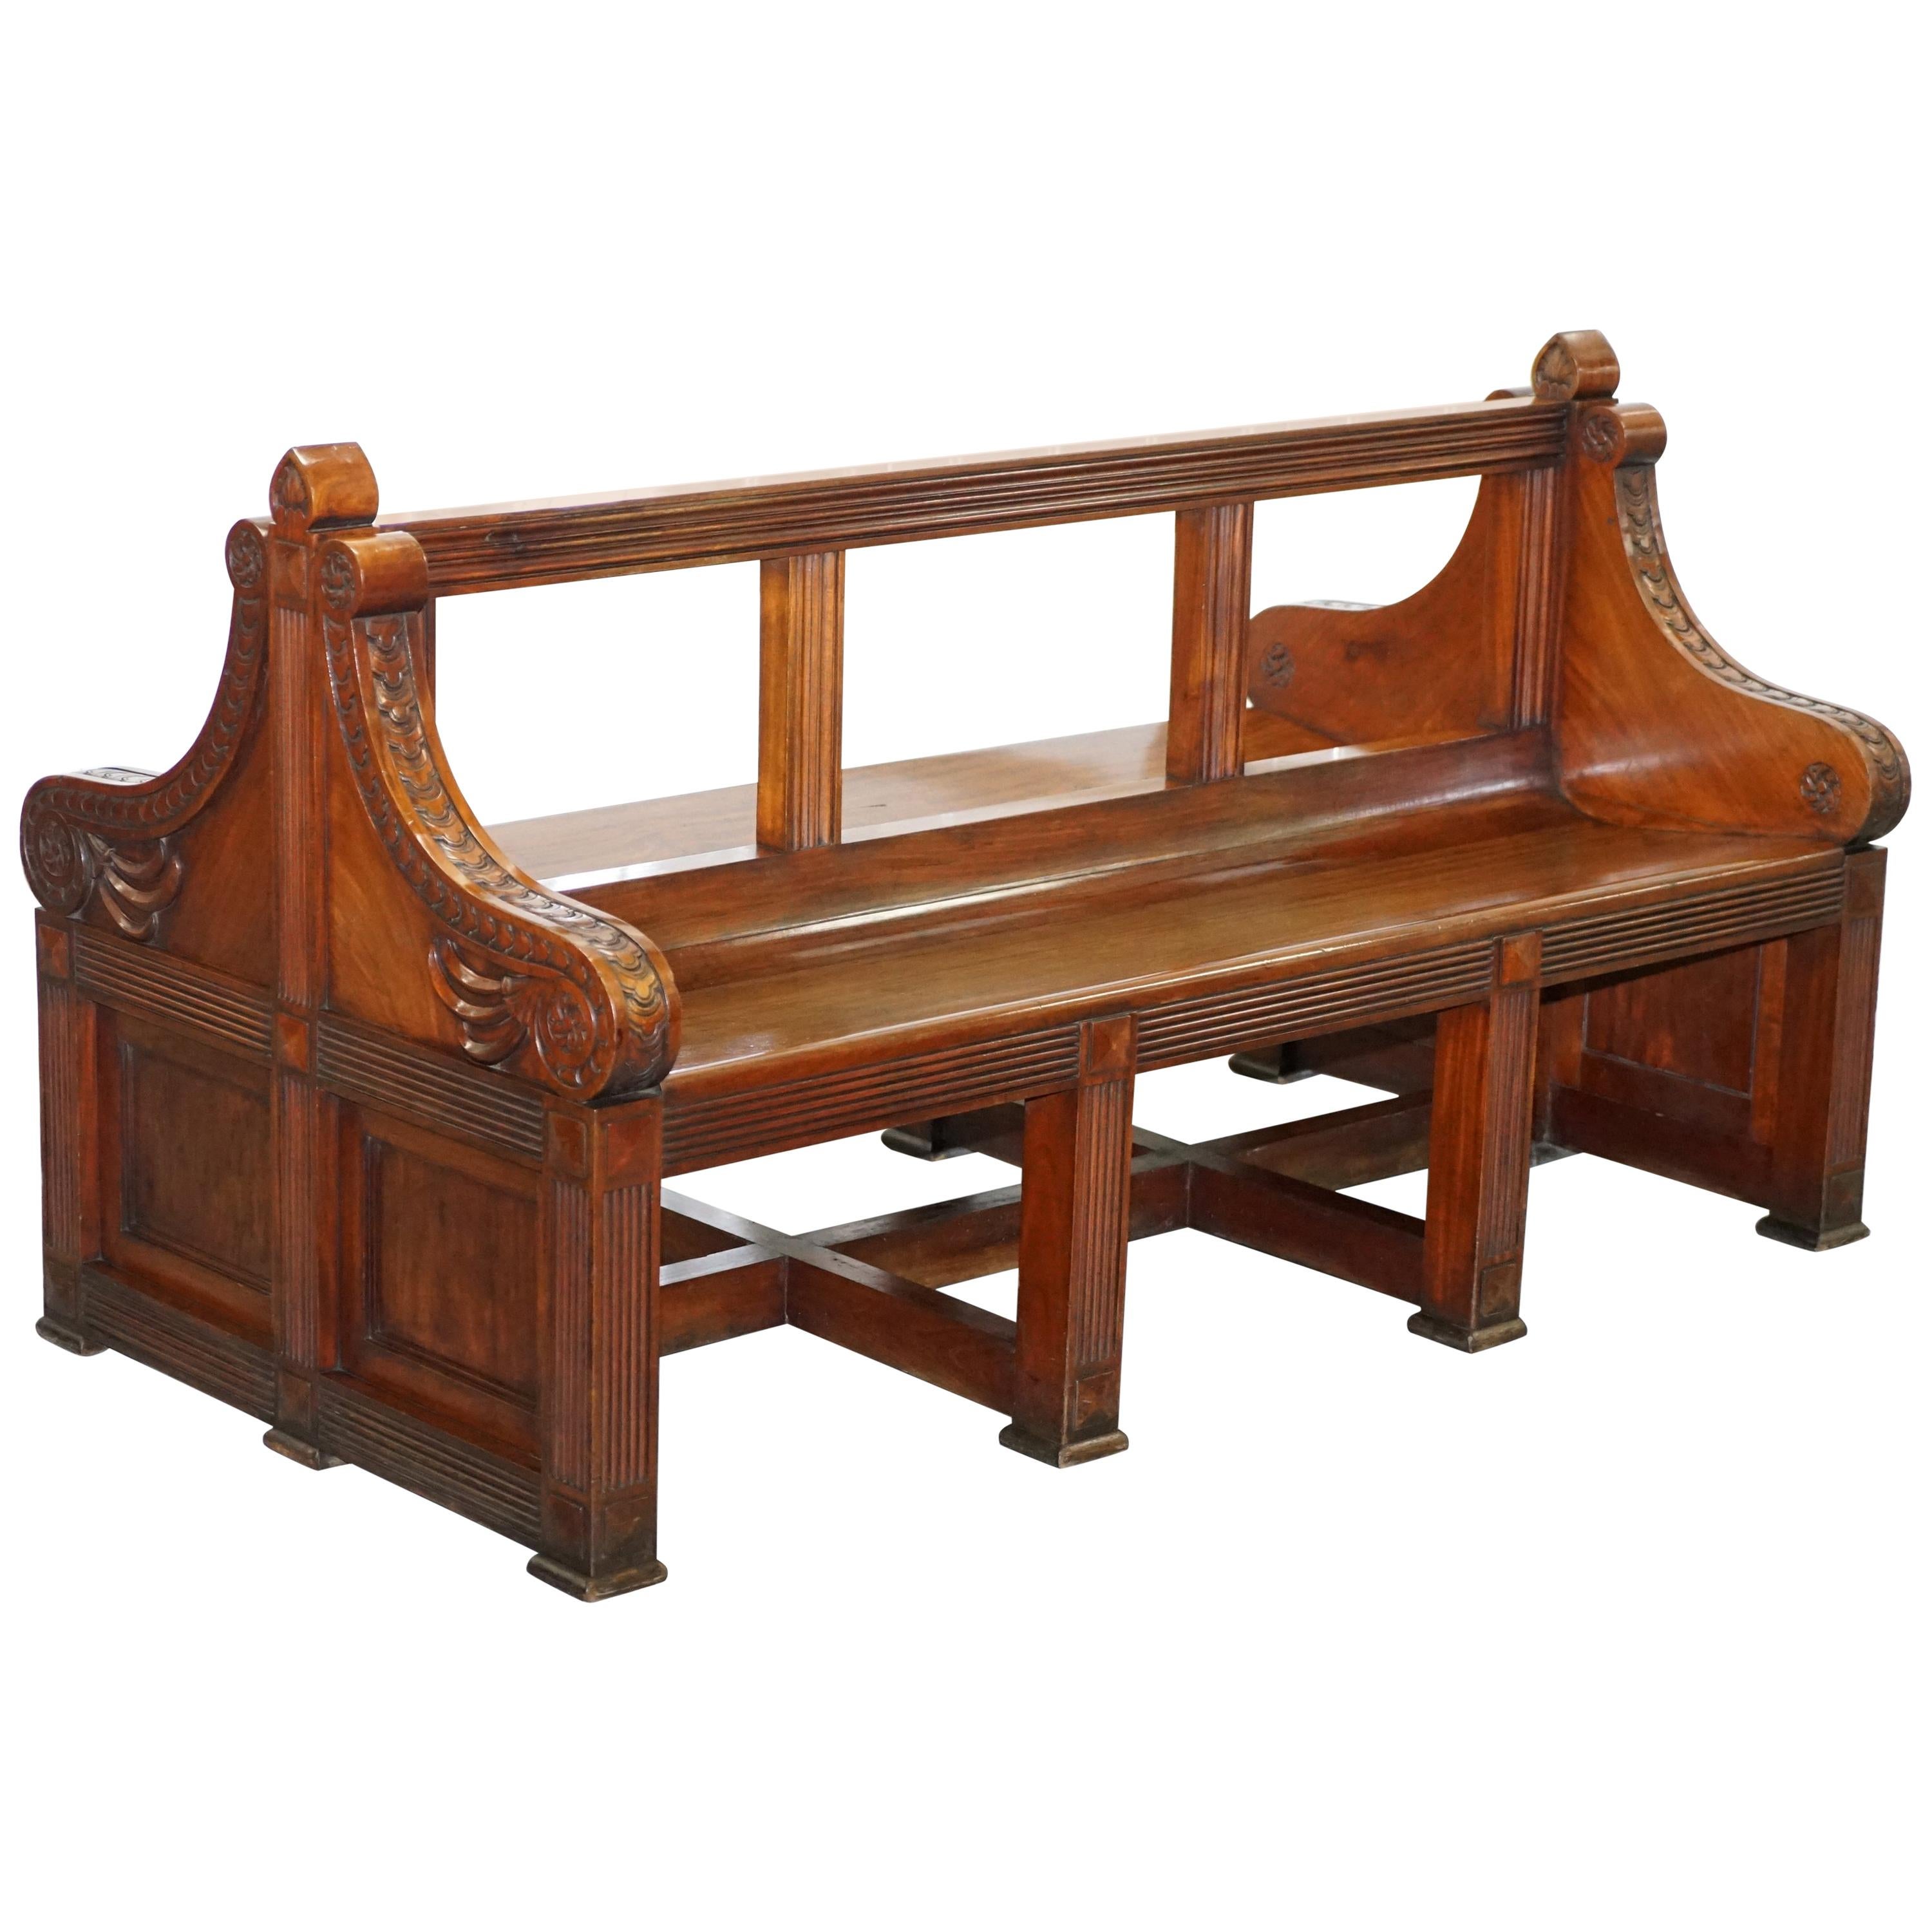 Rare Victorian Walnut Double Sided Museum Gallery Pew Bench Pugin Gothic Steeple For Sale